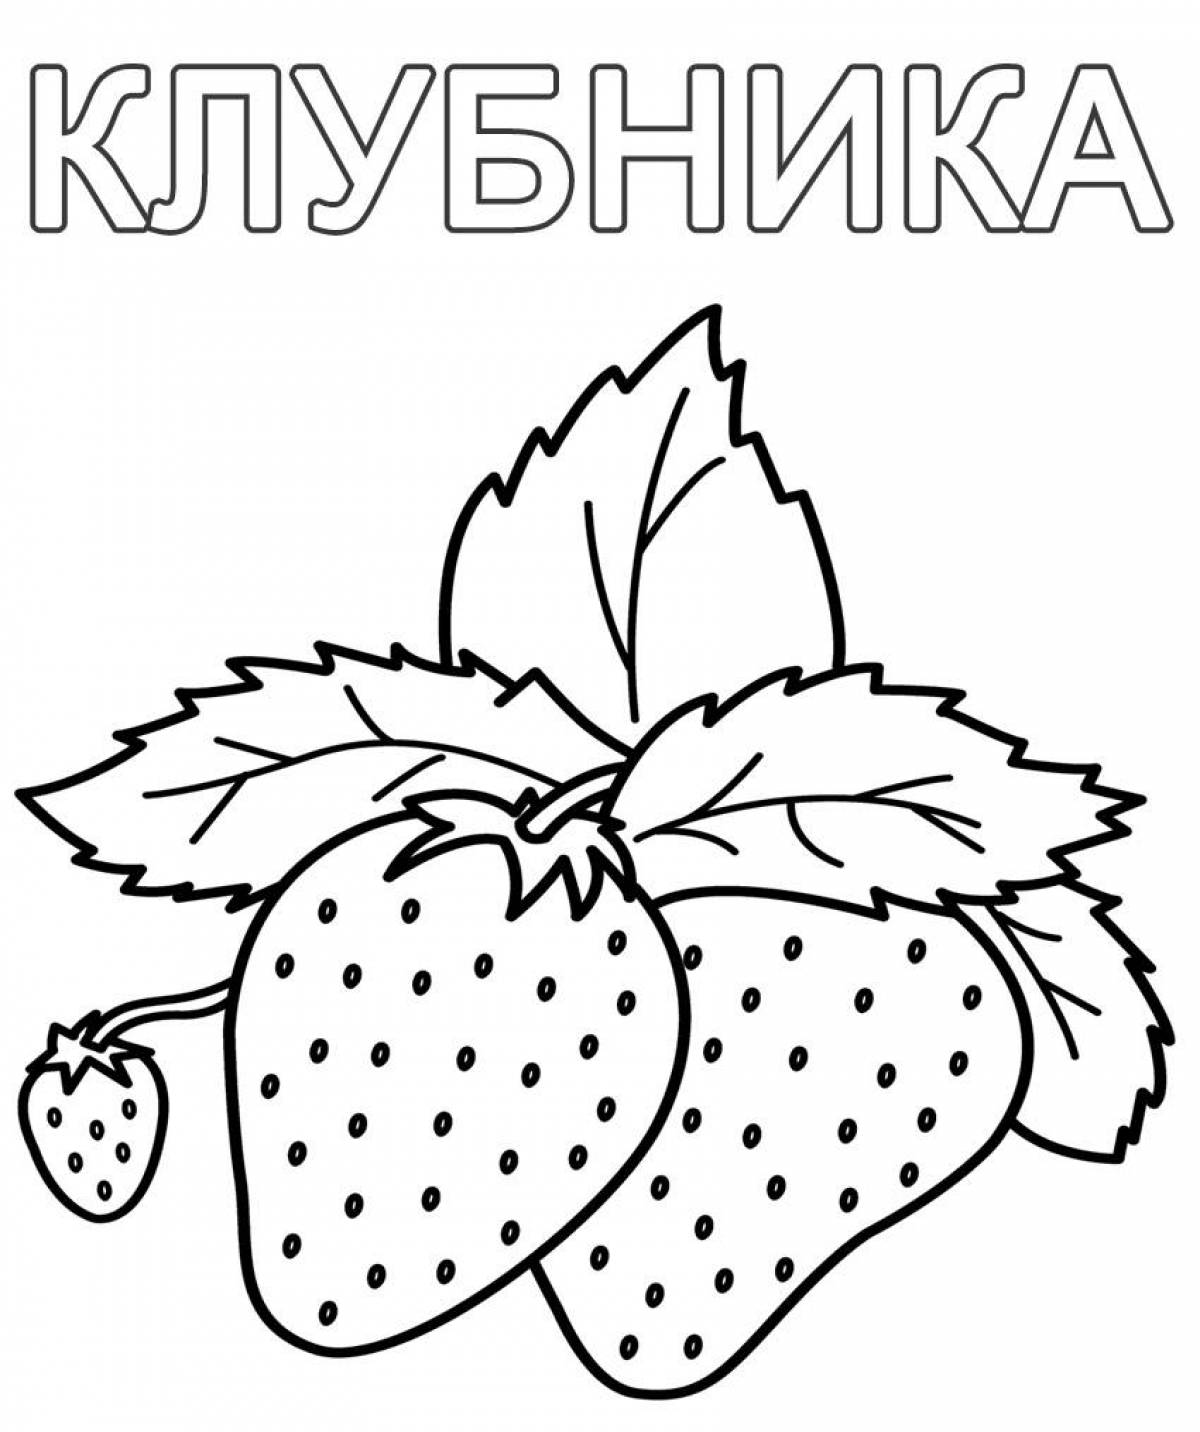 Shimmering vegetable coloring page